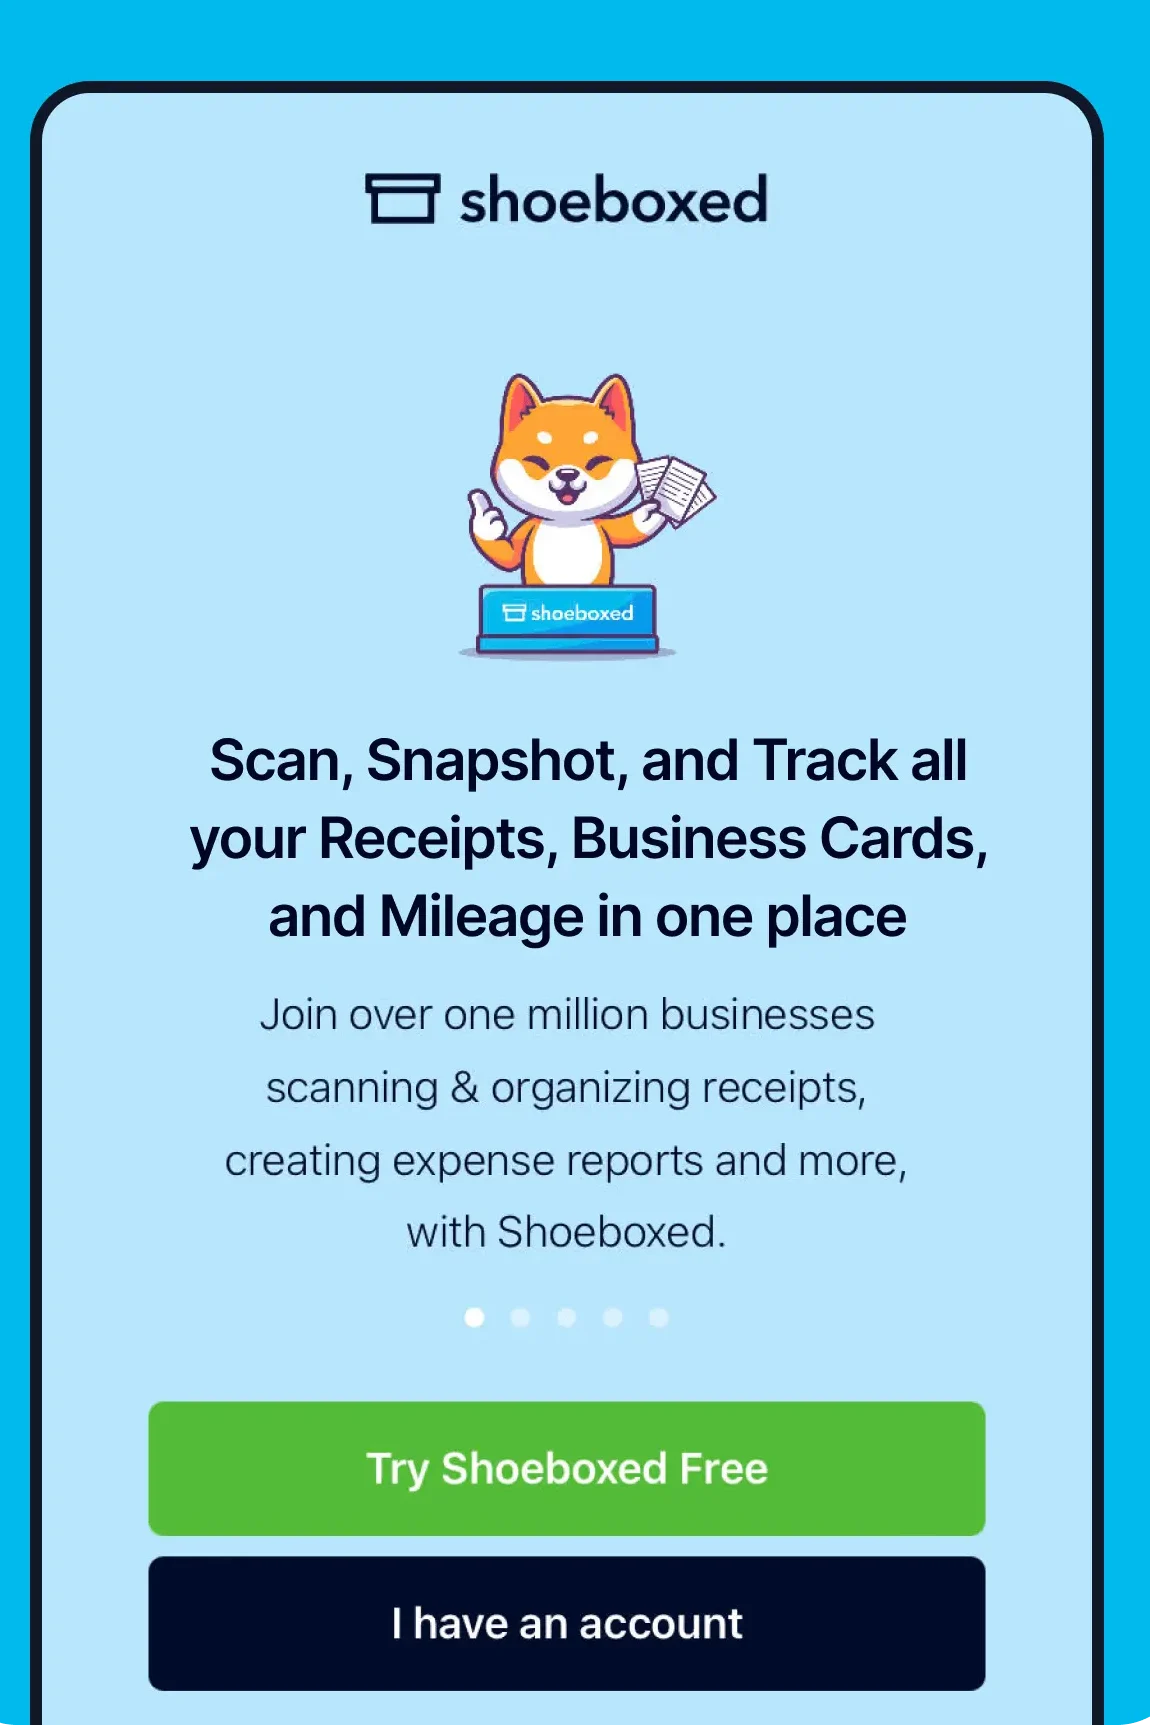 Shoeboxed App Screen

Scan, snapshot, and track all your receipts, business cards, and mileage in one place.

Join over one million businesses scanning and organizing receipts, creating expense reports, and more with Shoeboxed.